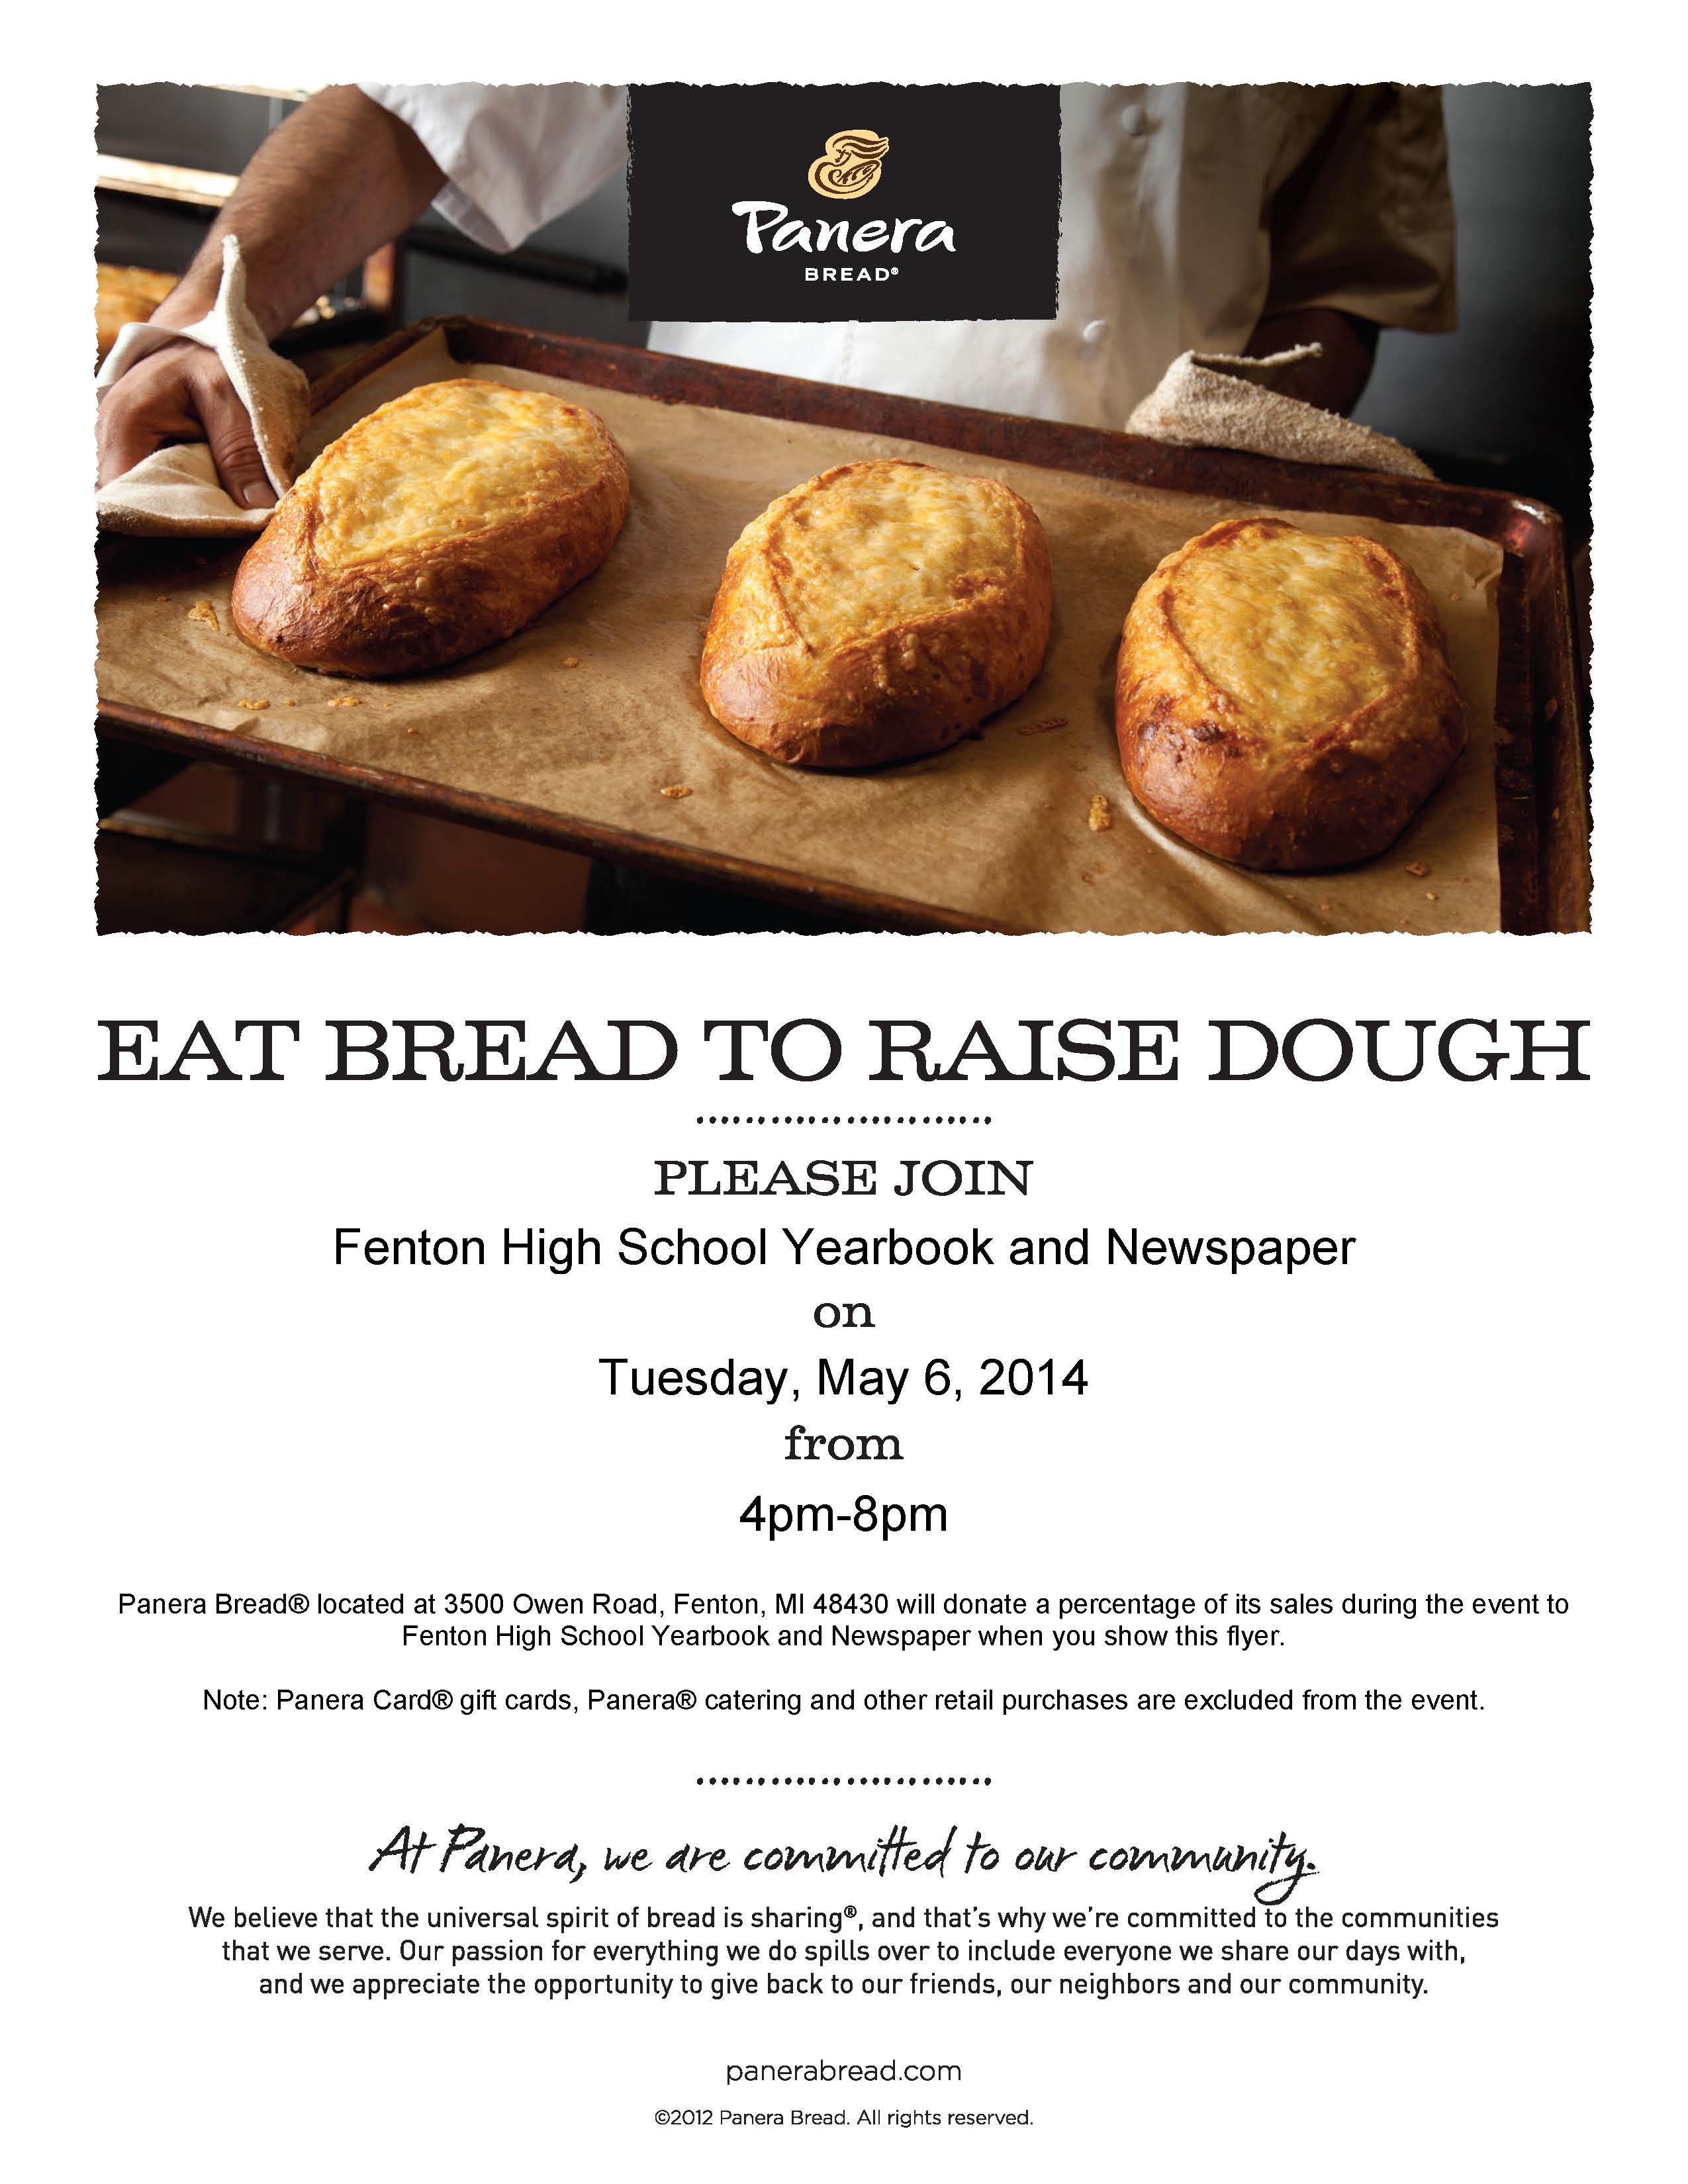 Show this flyer with your Panera Bread purchase to help in supporting FHS publications.